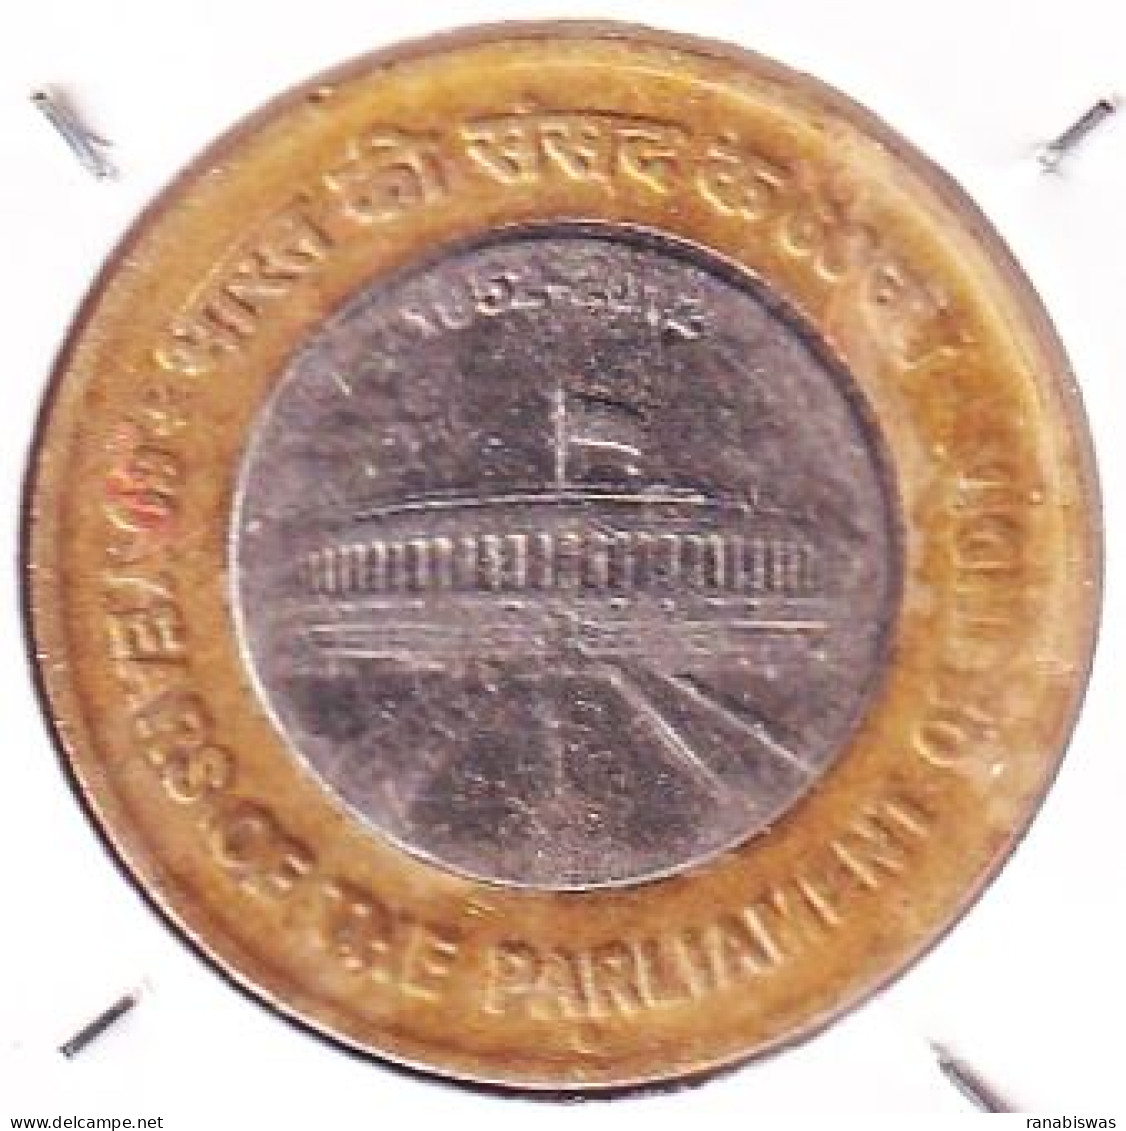 INDIA COIN LOT 452, 10 RUPEES 2012, PARLIAMENT, NOIDA MINT, XF, SCARE - India